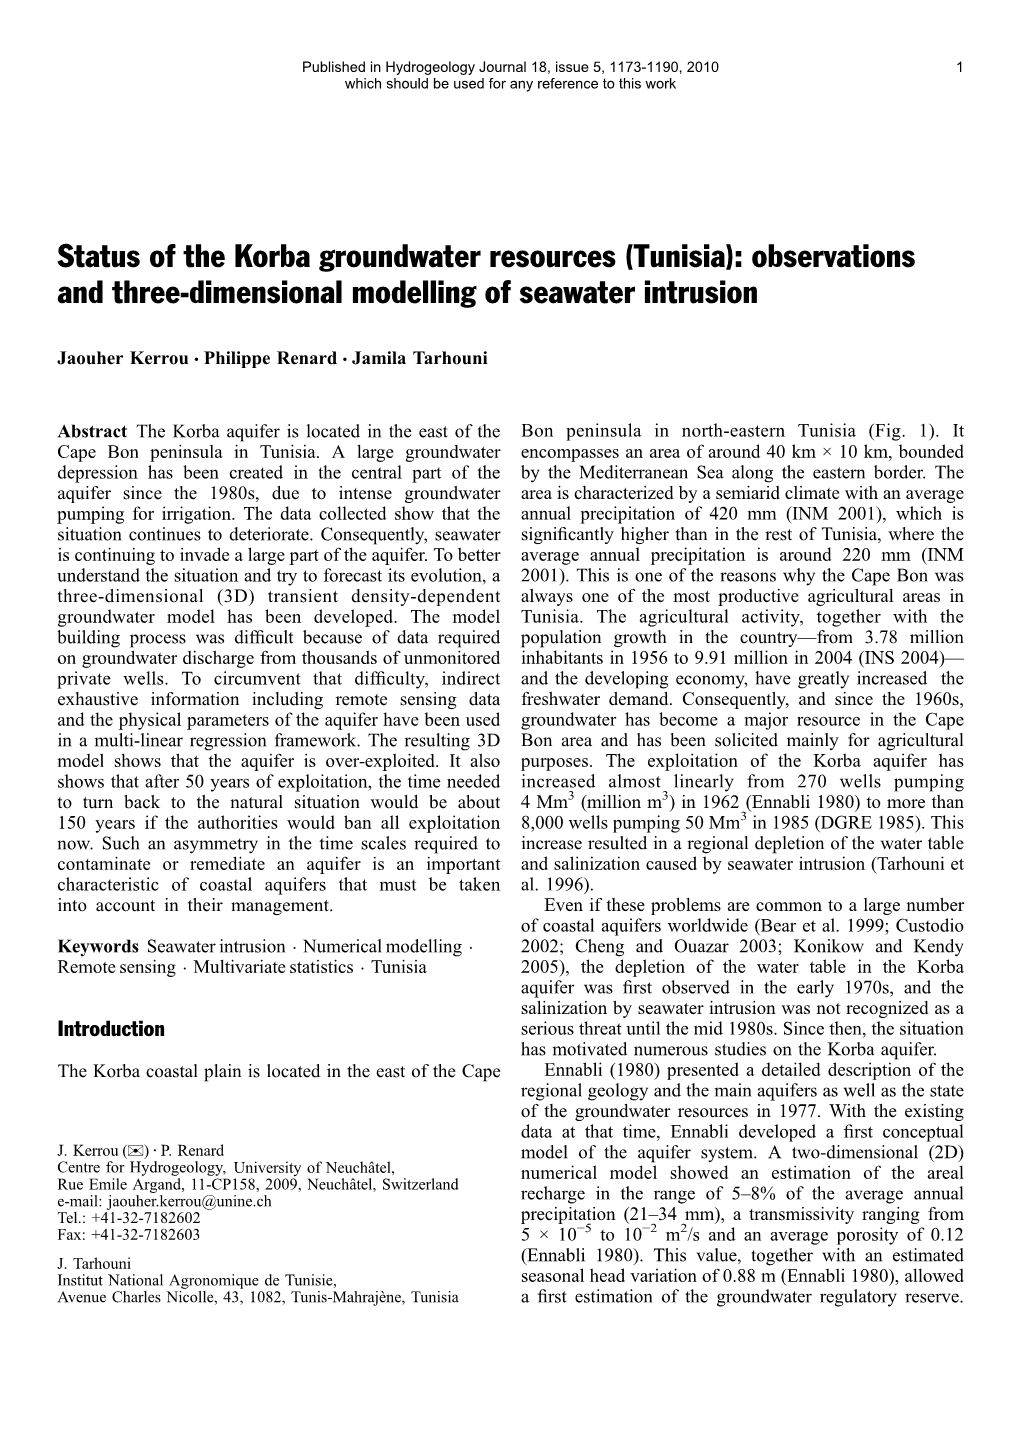 Status of the Korba Groundwater Resources (Tunisia): Observations and Three-Dimensional Modelling of Seawater Intrusion